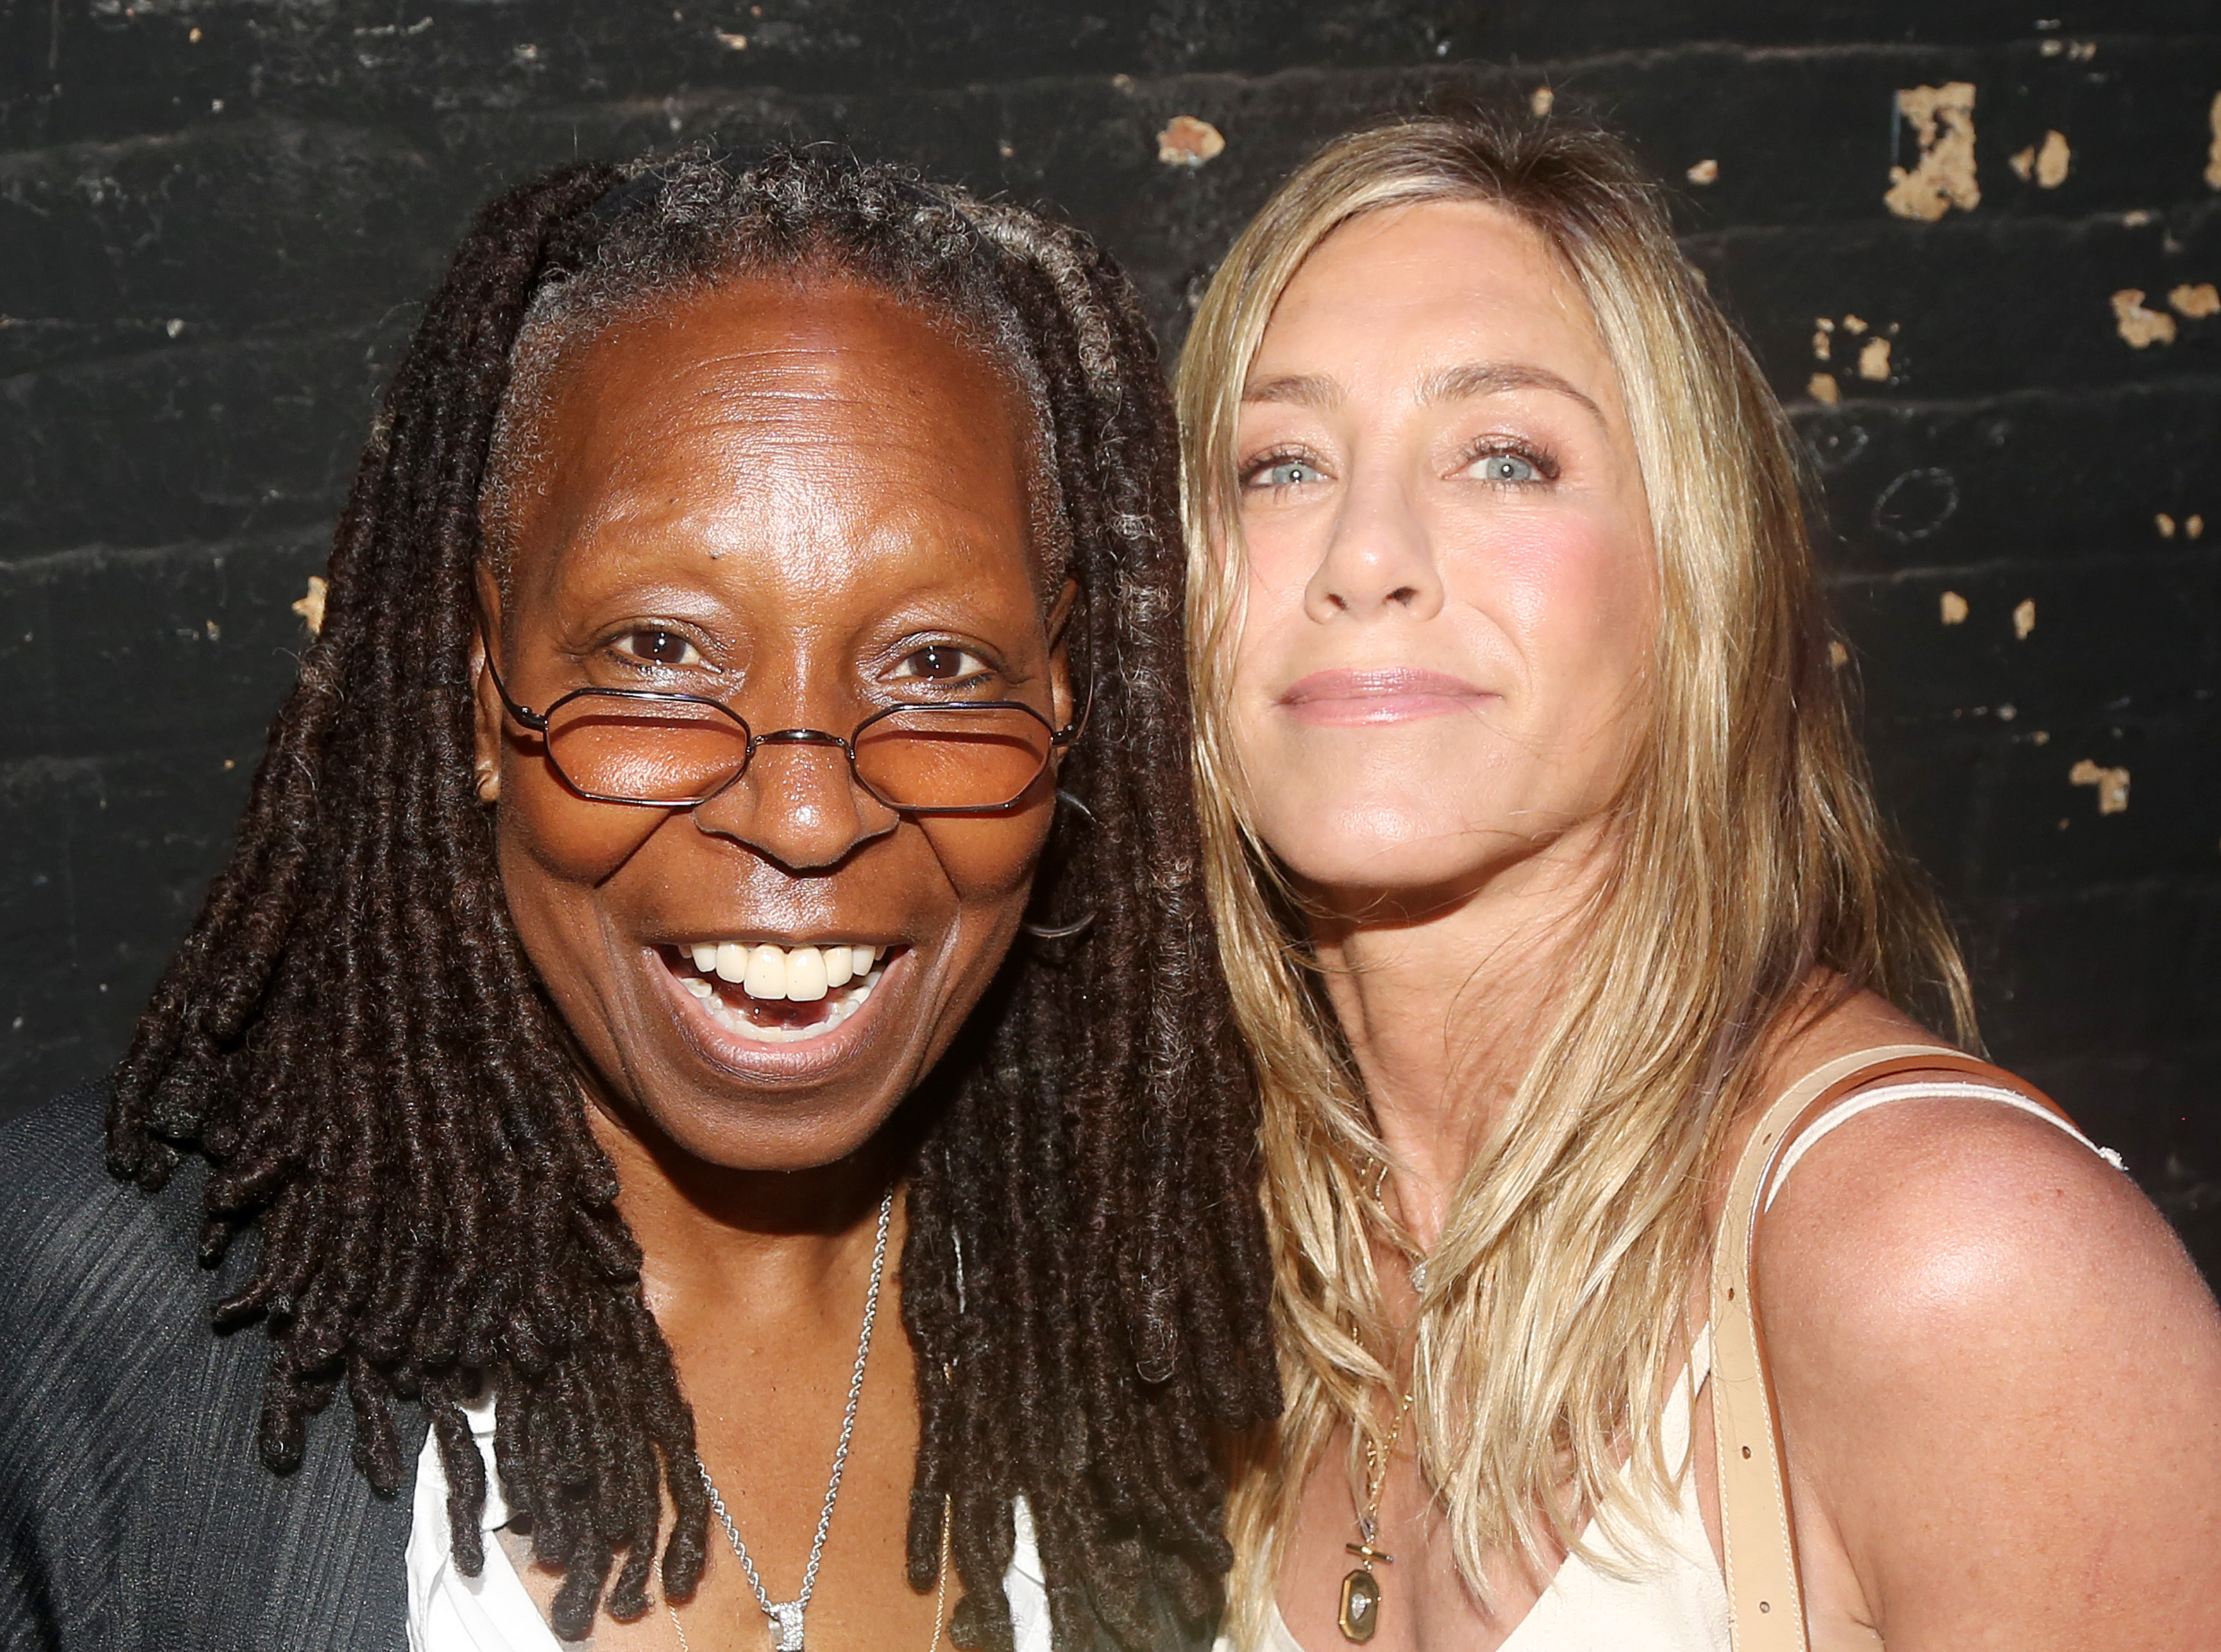 Whoopi Goldberg and Jennifer Aniston at Oh Mary! on Broadway